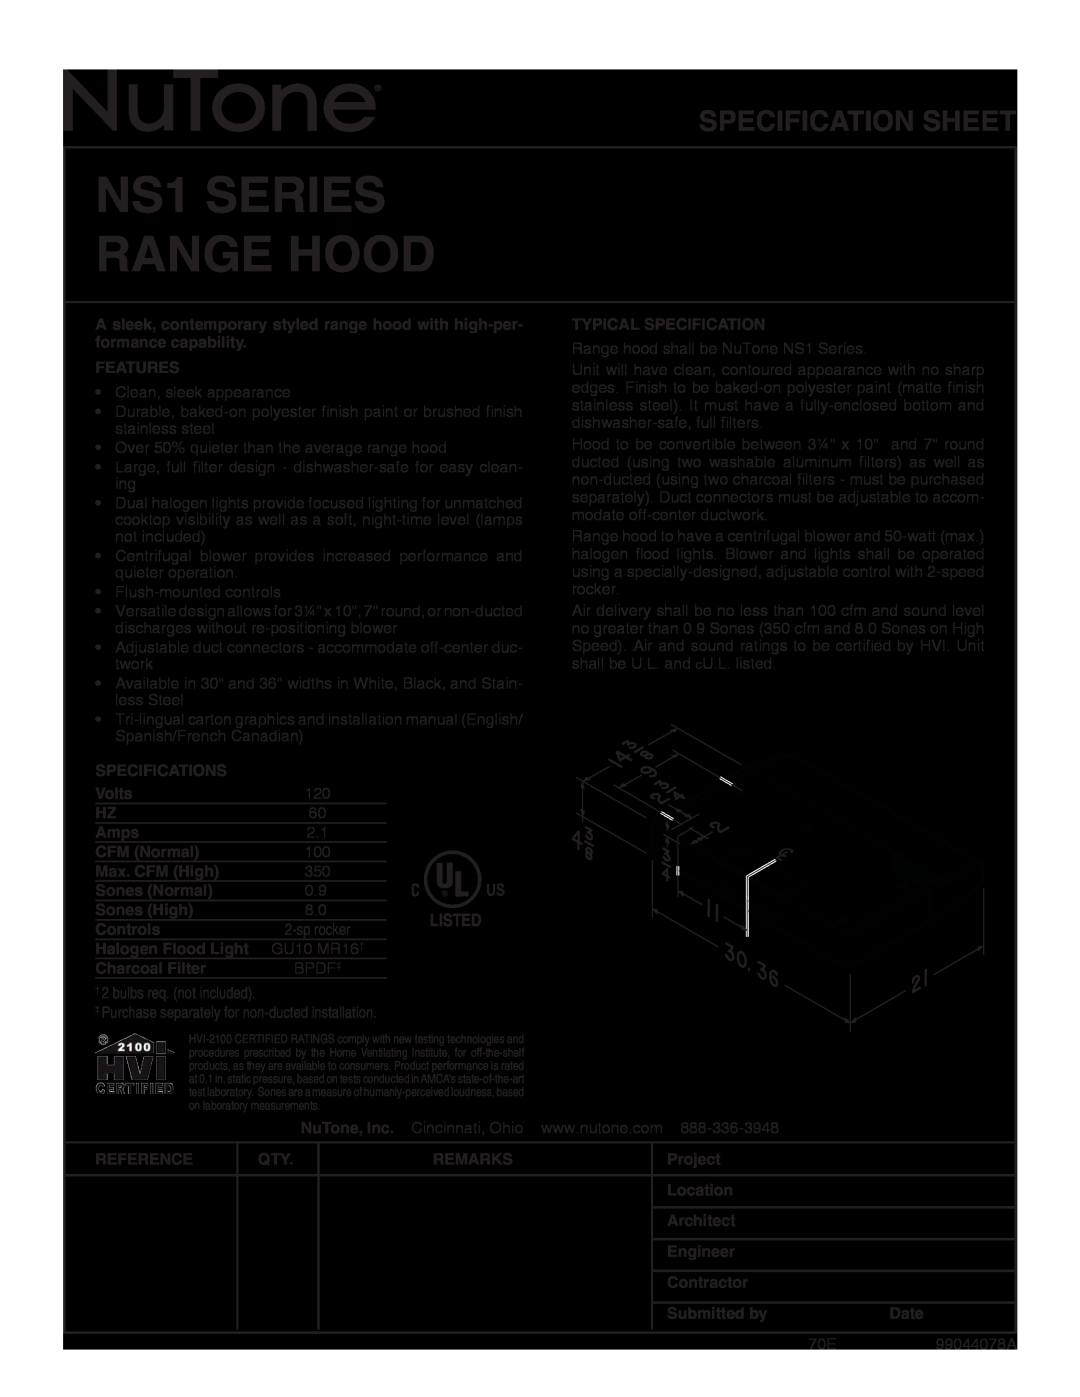 NuTone specifications NS1 SERIES RANGE HOOD, Specification Sheet 